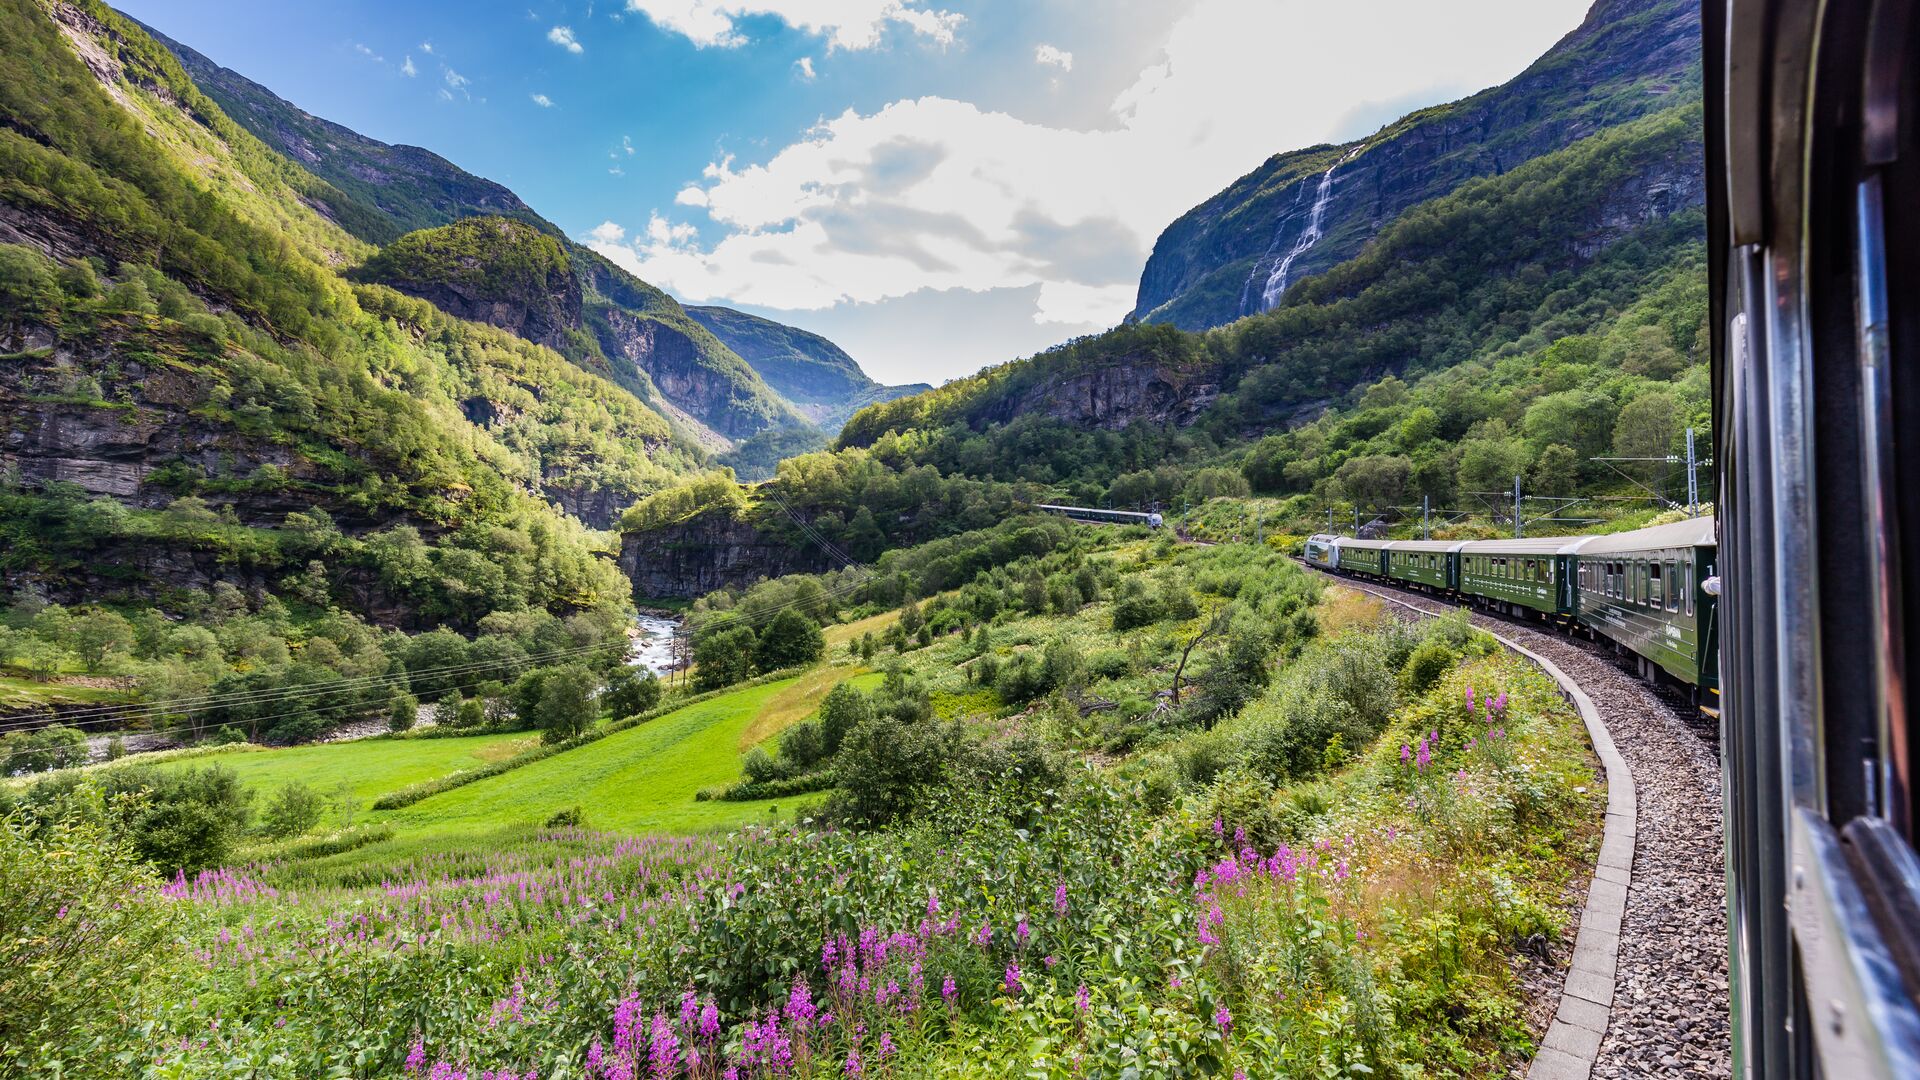 View from the carriage of the Flåm train in Norway